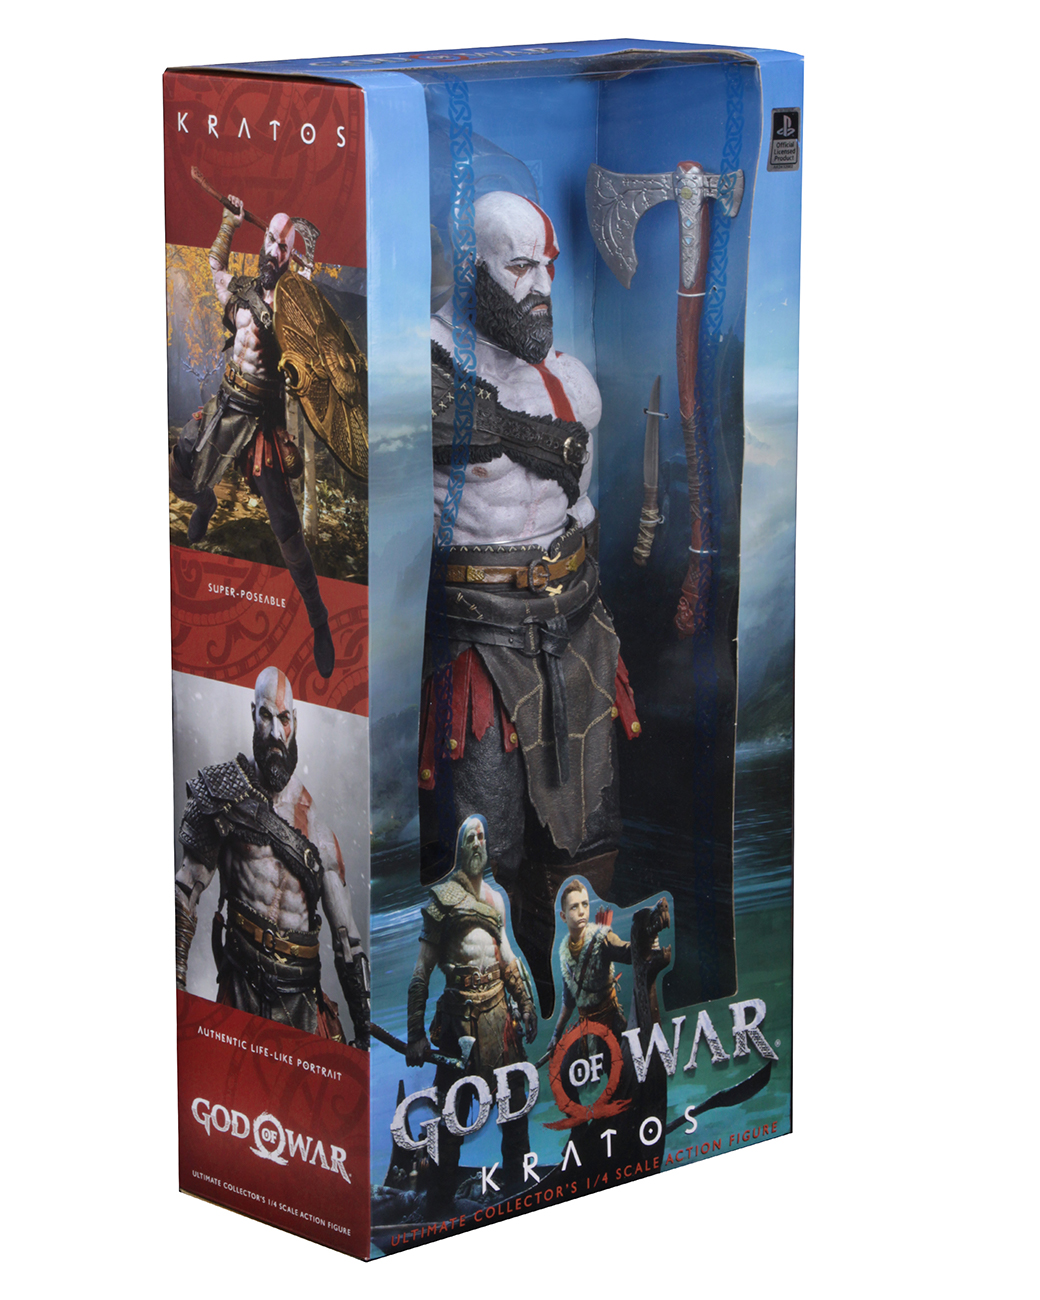 Kratos God Of War 1:4 Scale Figure by Neca - FREE SHIPPING - Spec Fiction  Shop